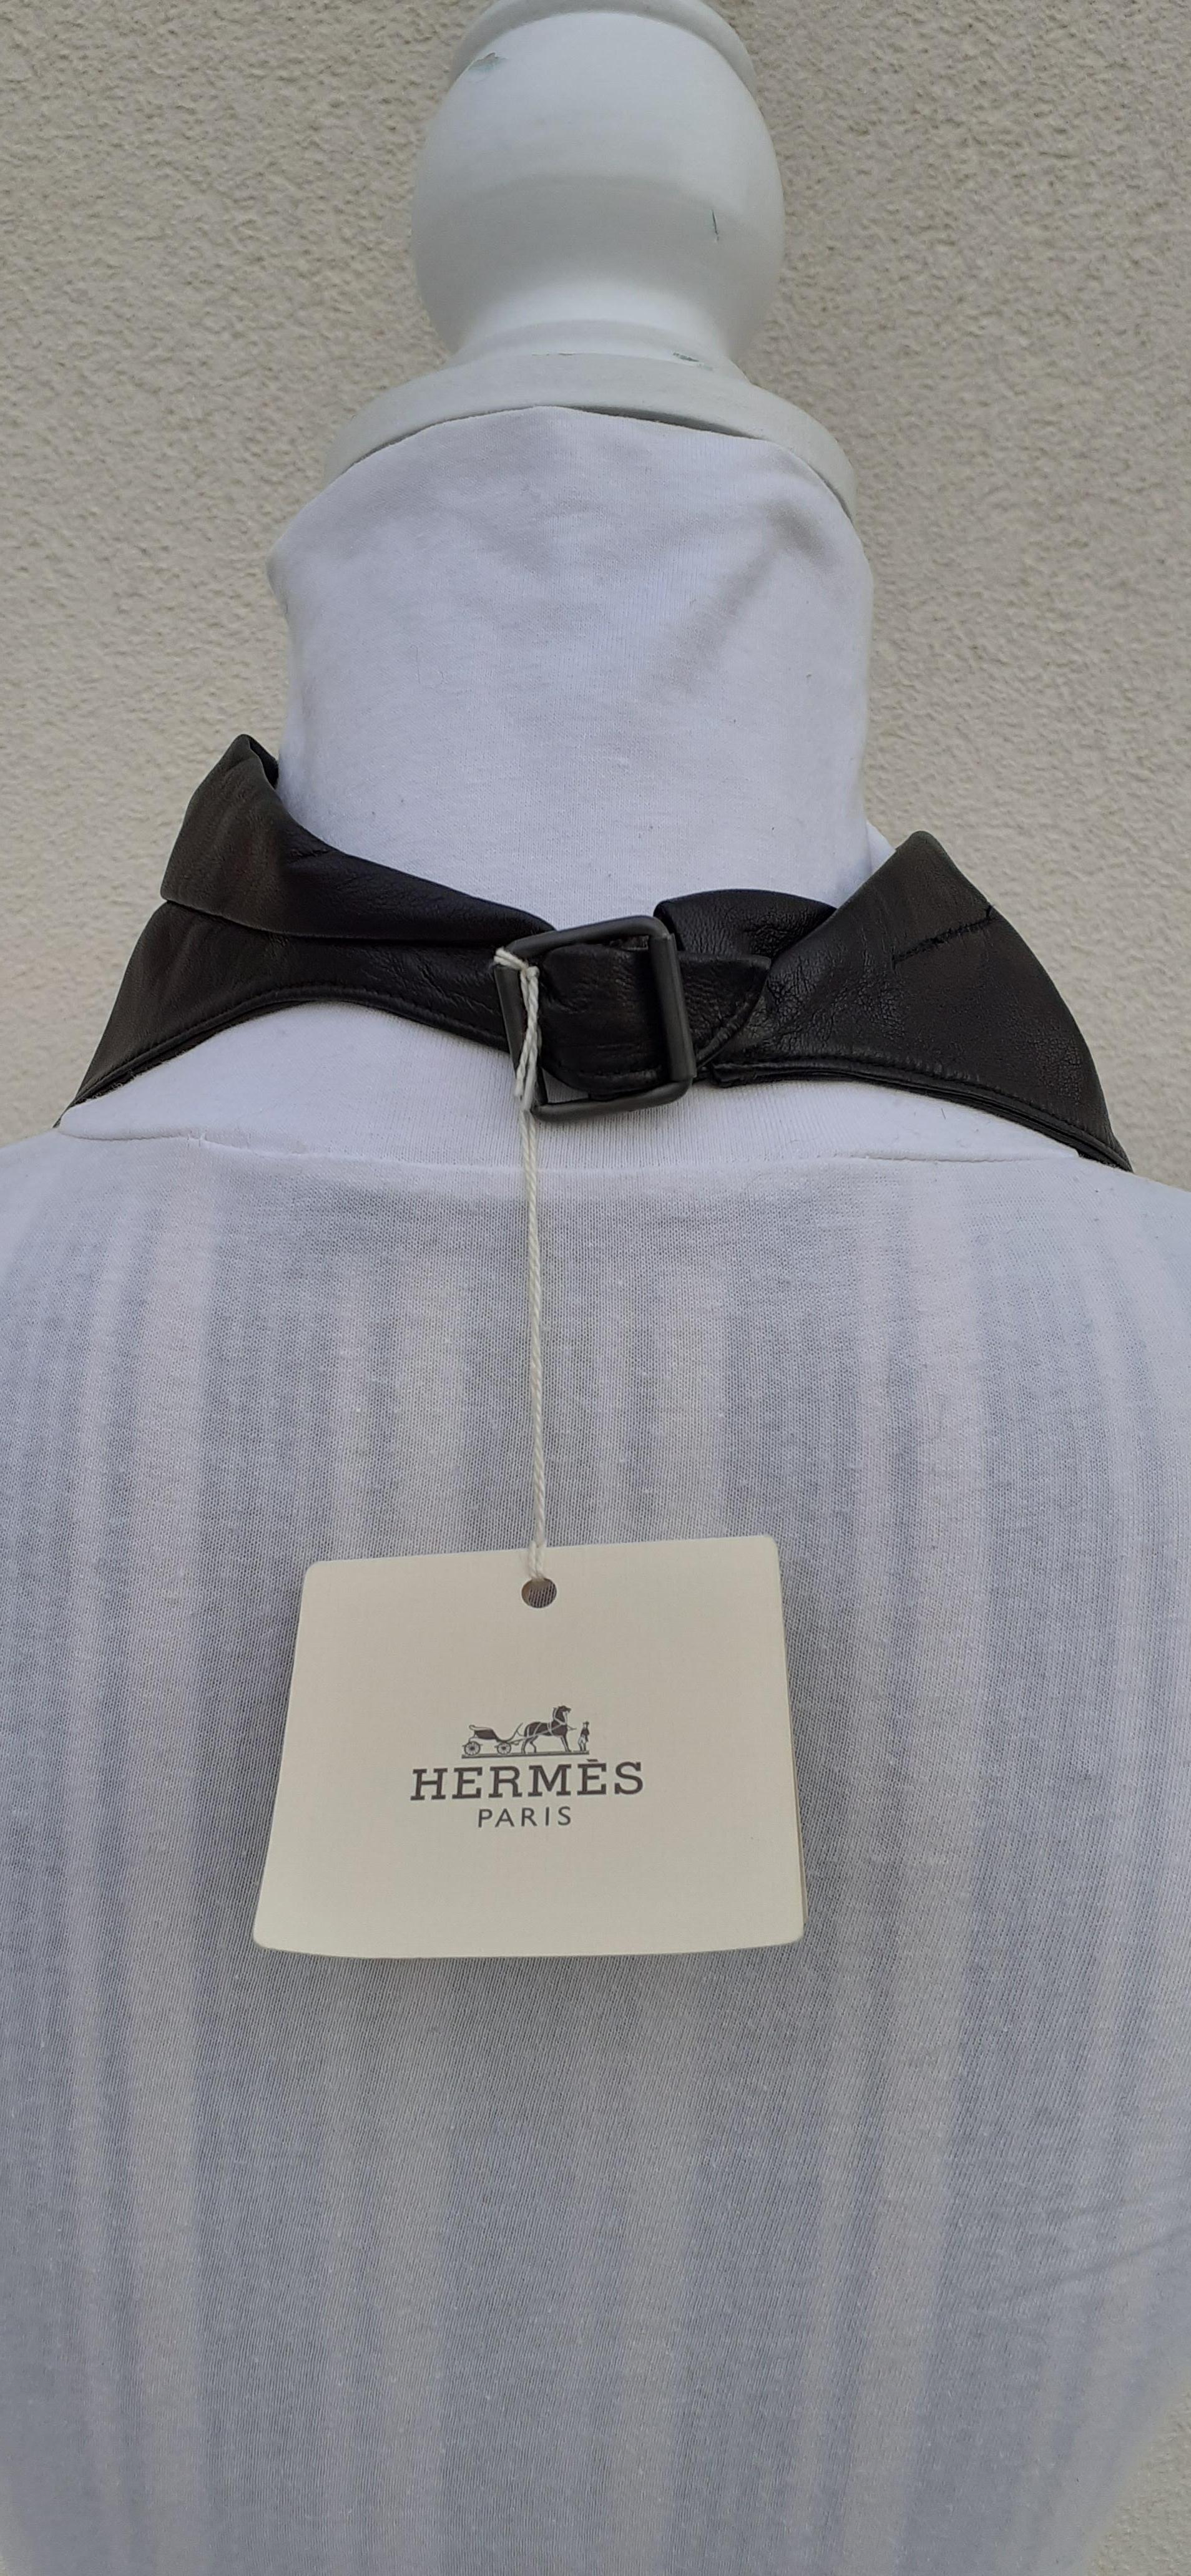 Black Exceptional Hermès Scarf Col Fichu Lambskin Leather Rodeo Bandana Texas RARE For Sale